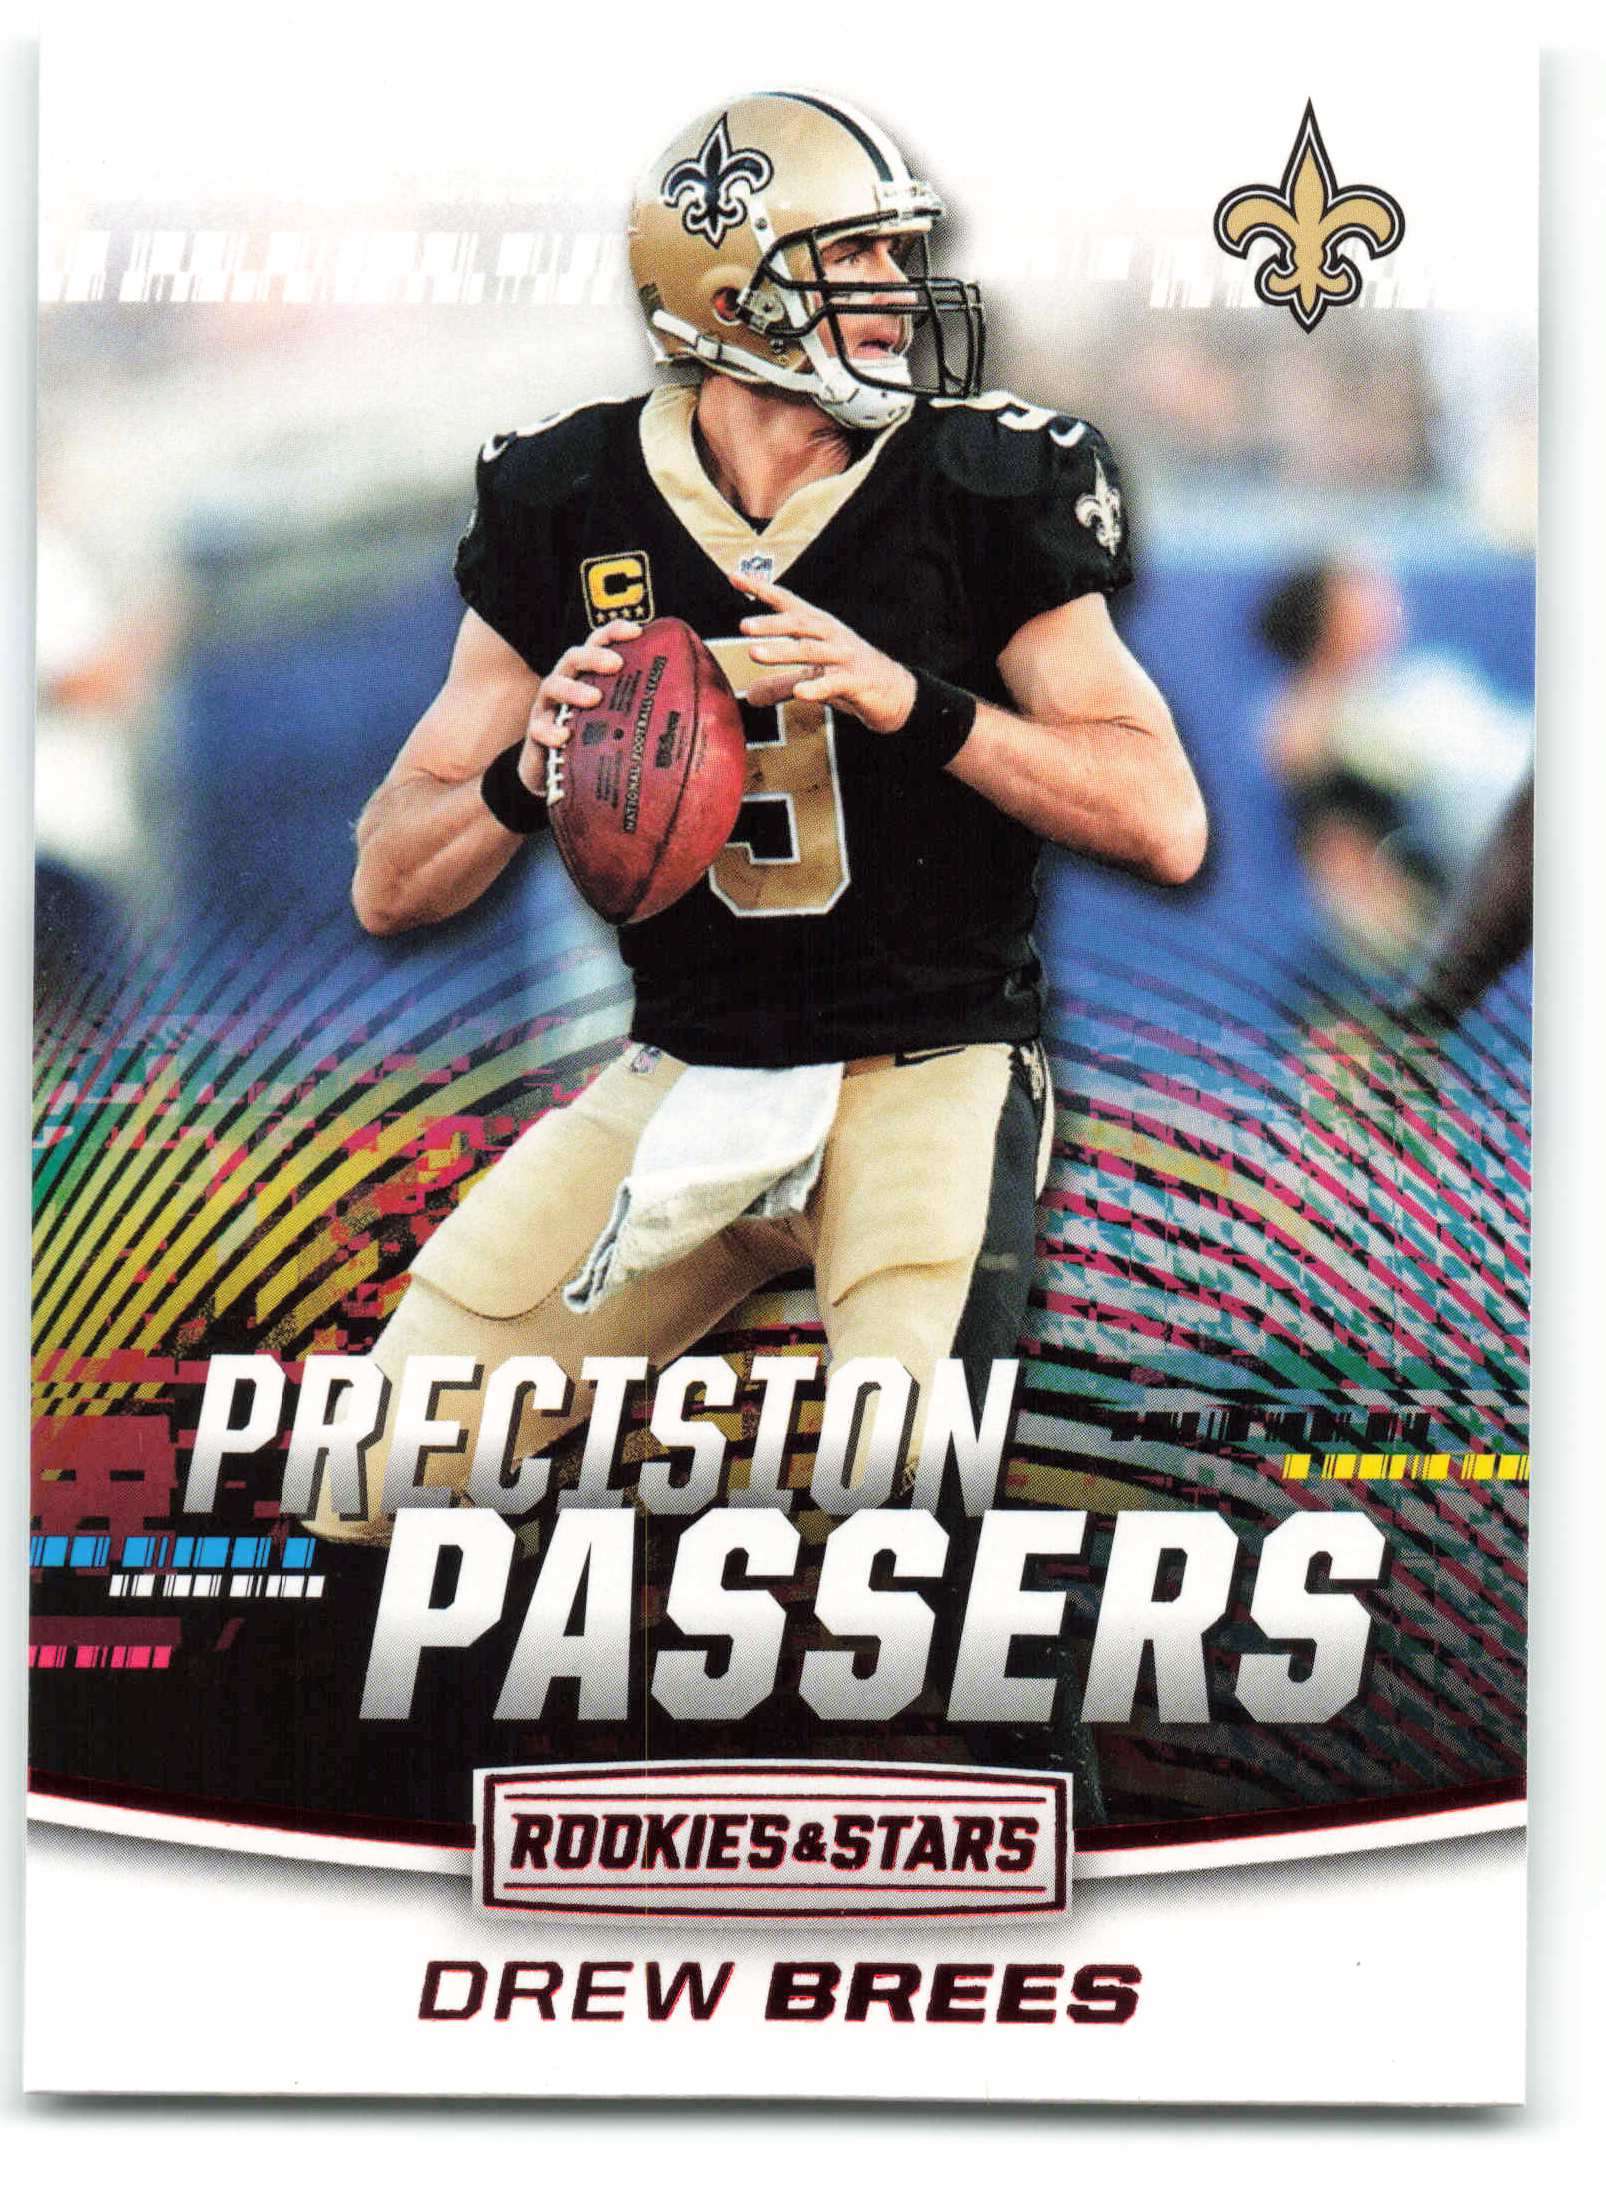 2018 Rookies and Stars Precision Passers #14 Drew Brees New Orleans Saints  NFL Football Trading Card (made by Panini)